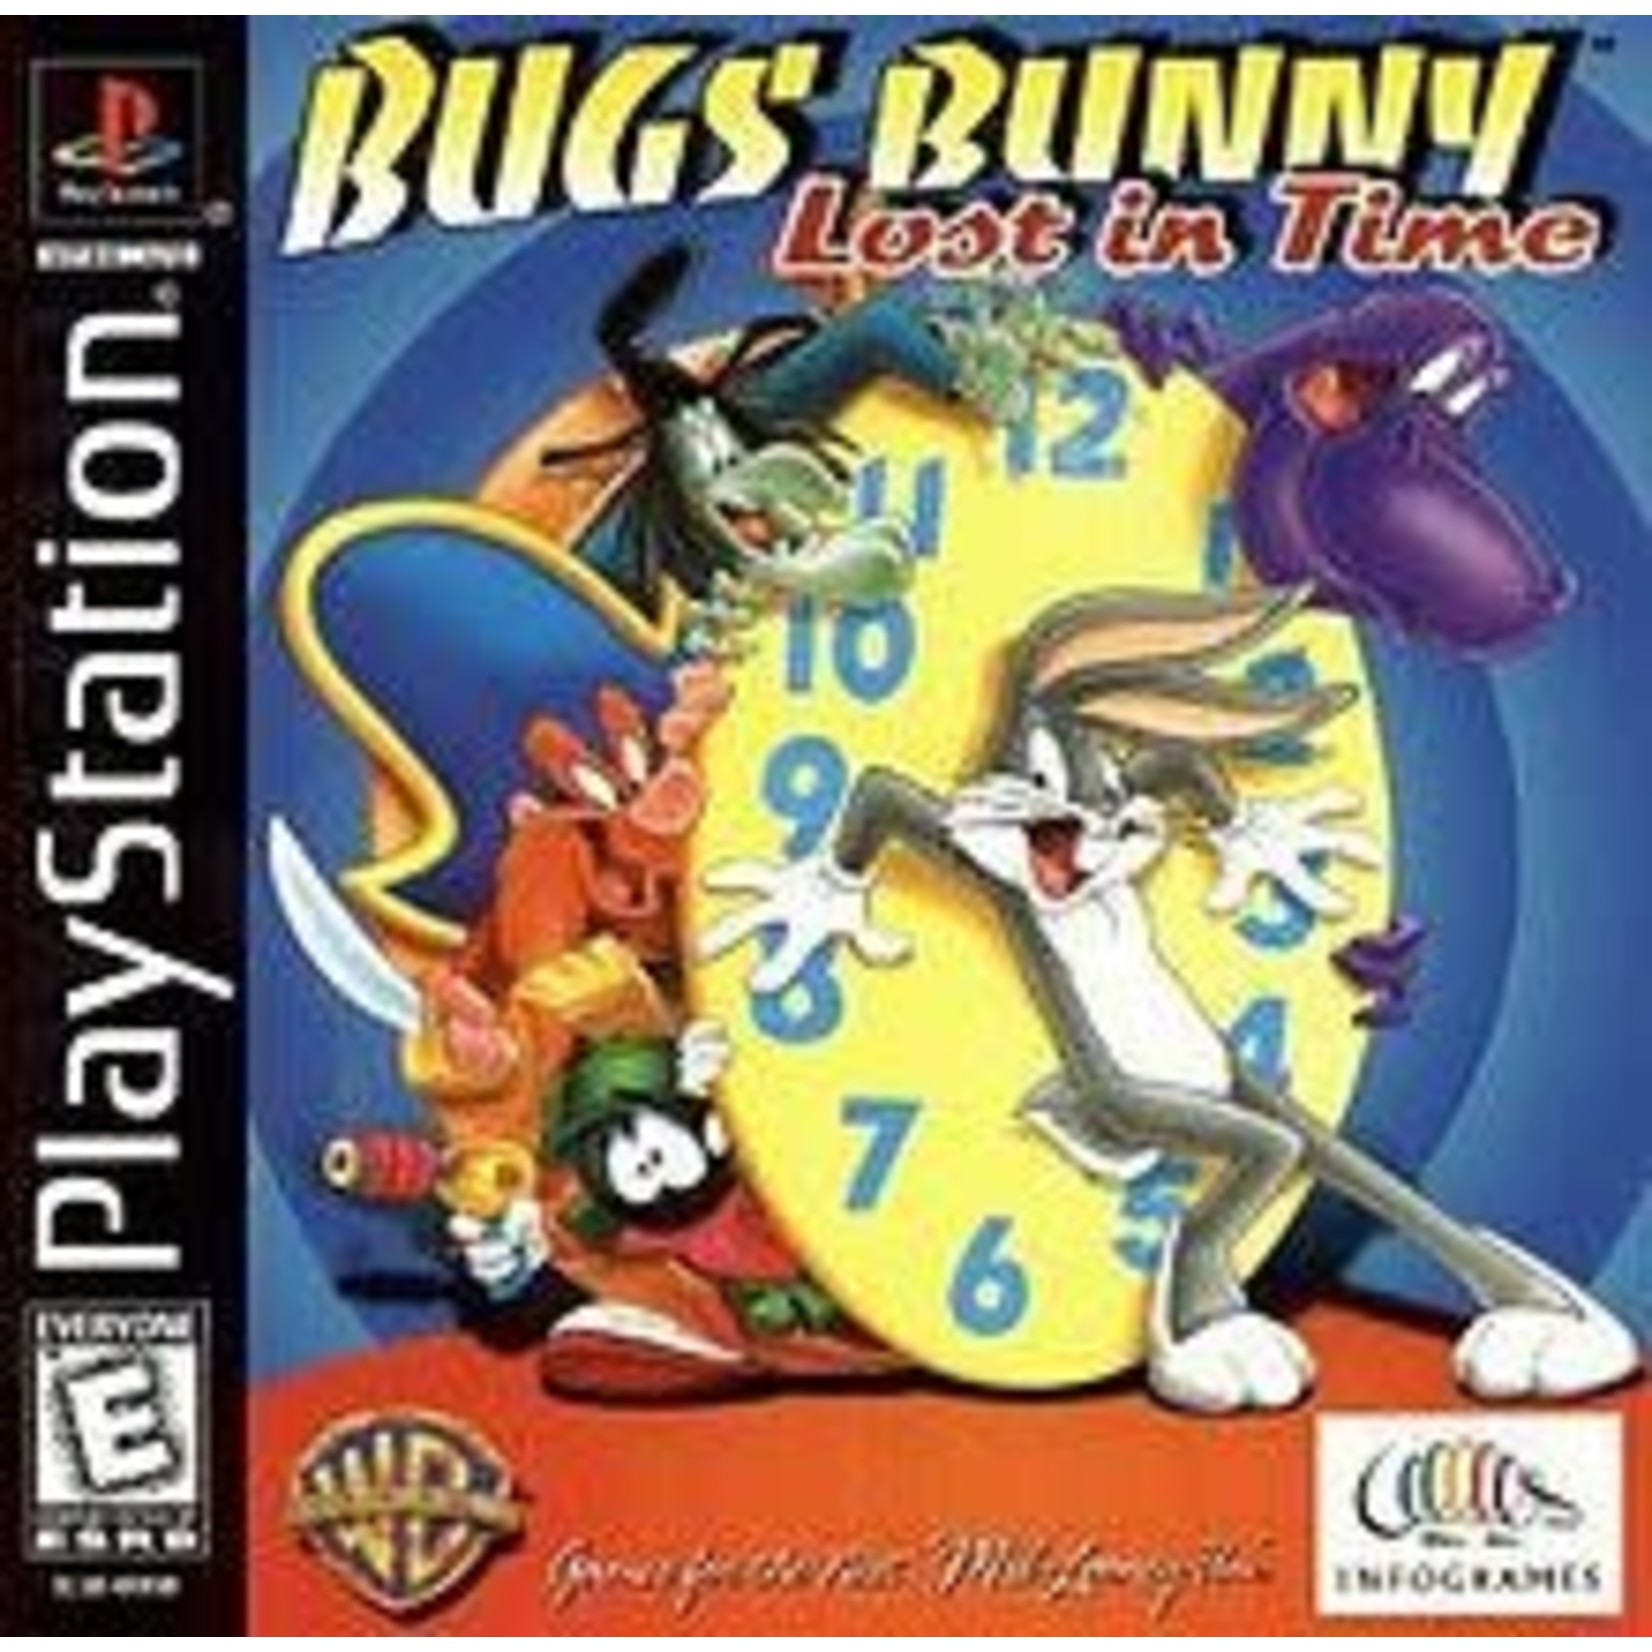 PS1U-Bugs Bunny: Lost in Time